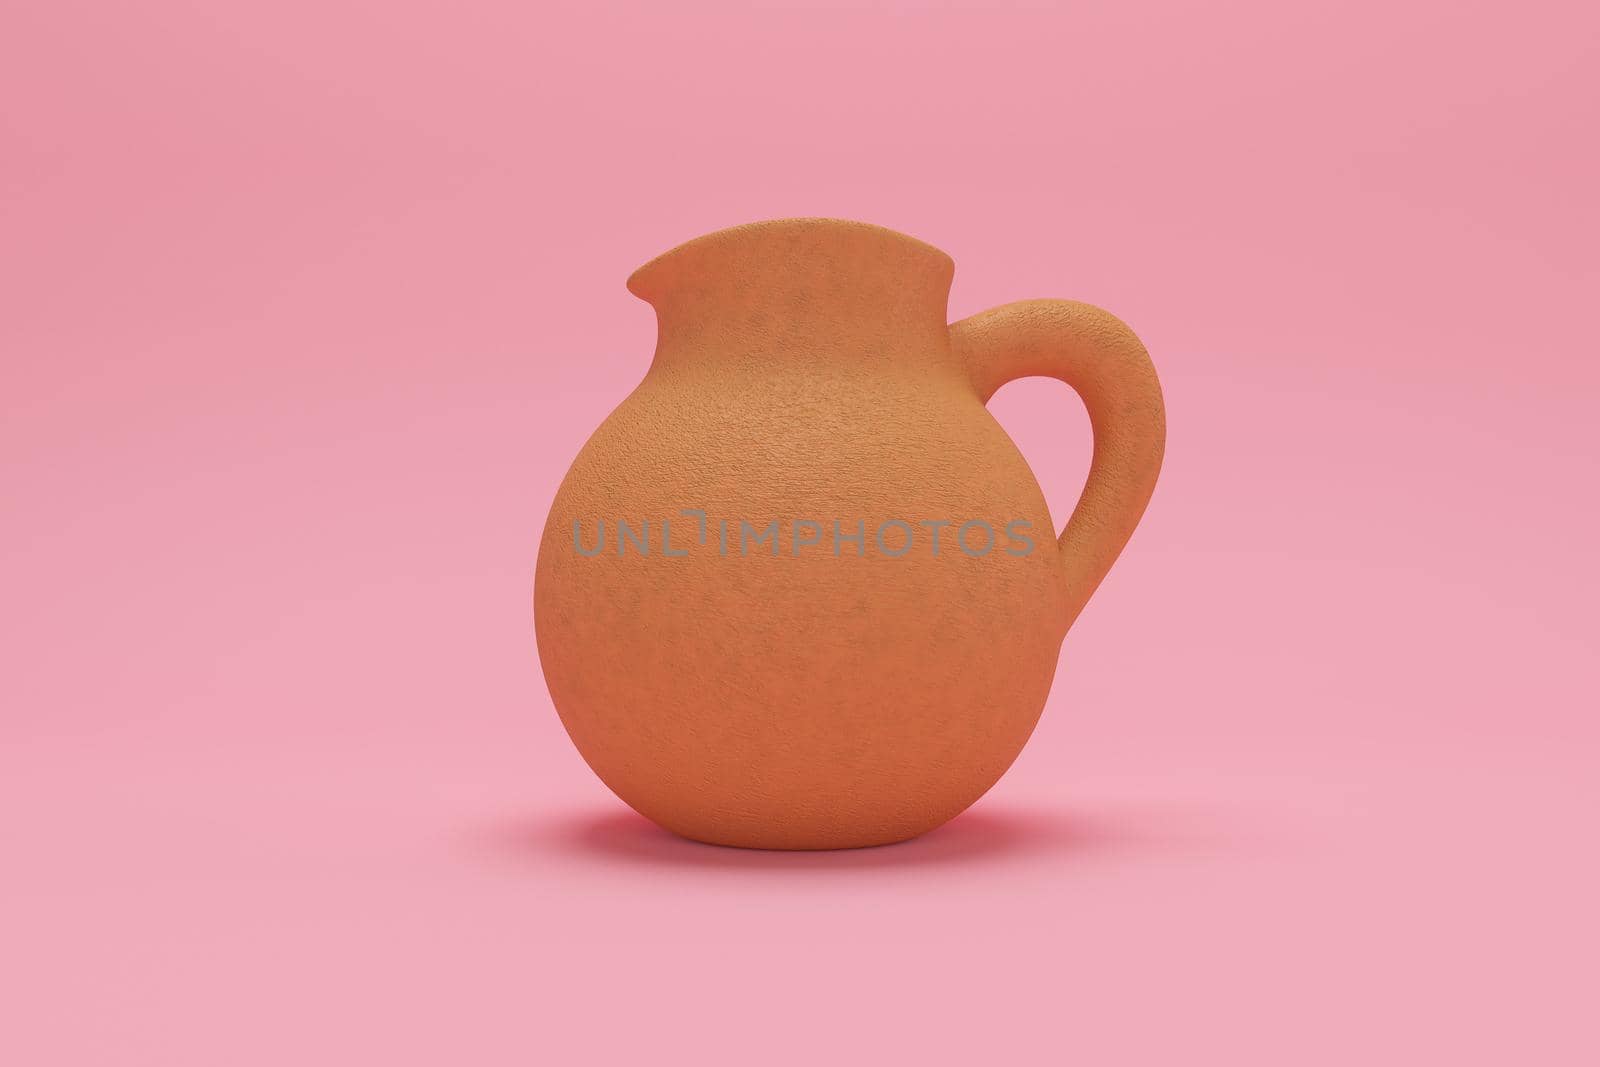 3d rendering Image of Jewish holiday Hanukkah with jar on a pink background.